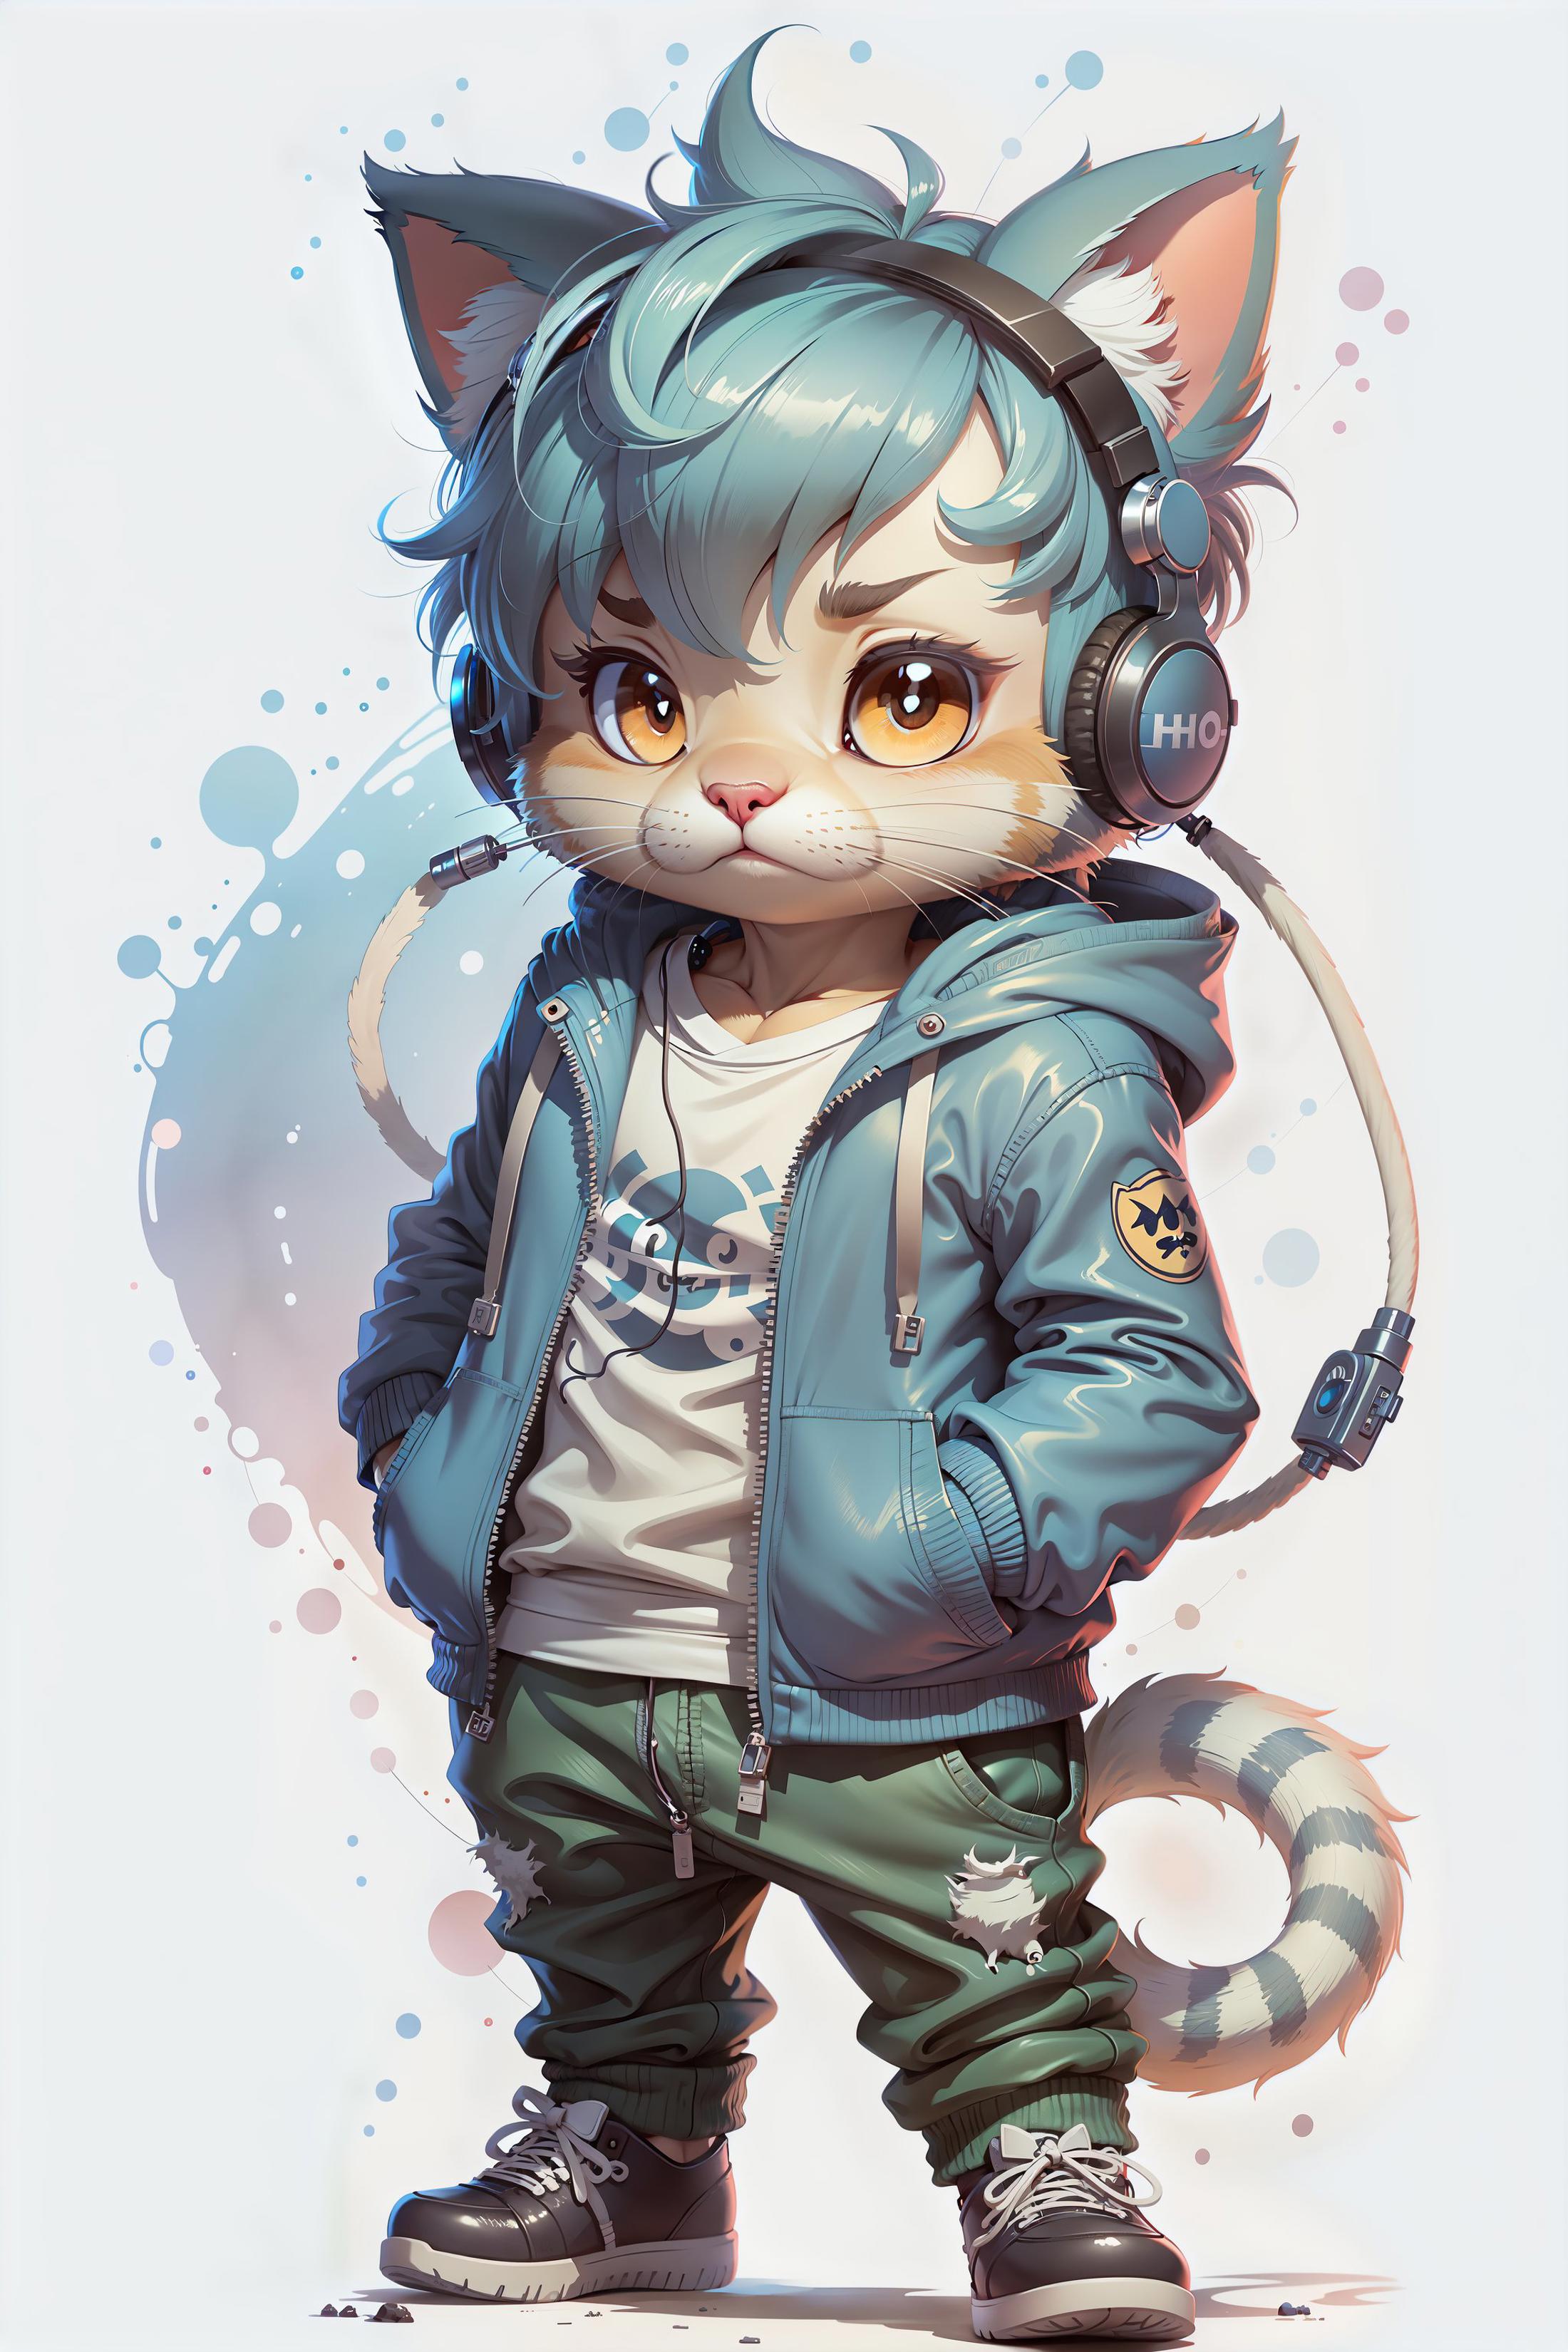 Cattastic (Humanized Animals) image by pm_mickey